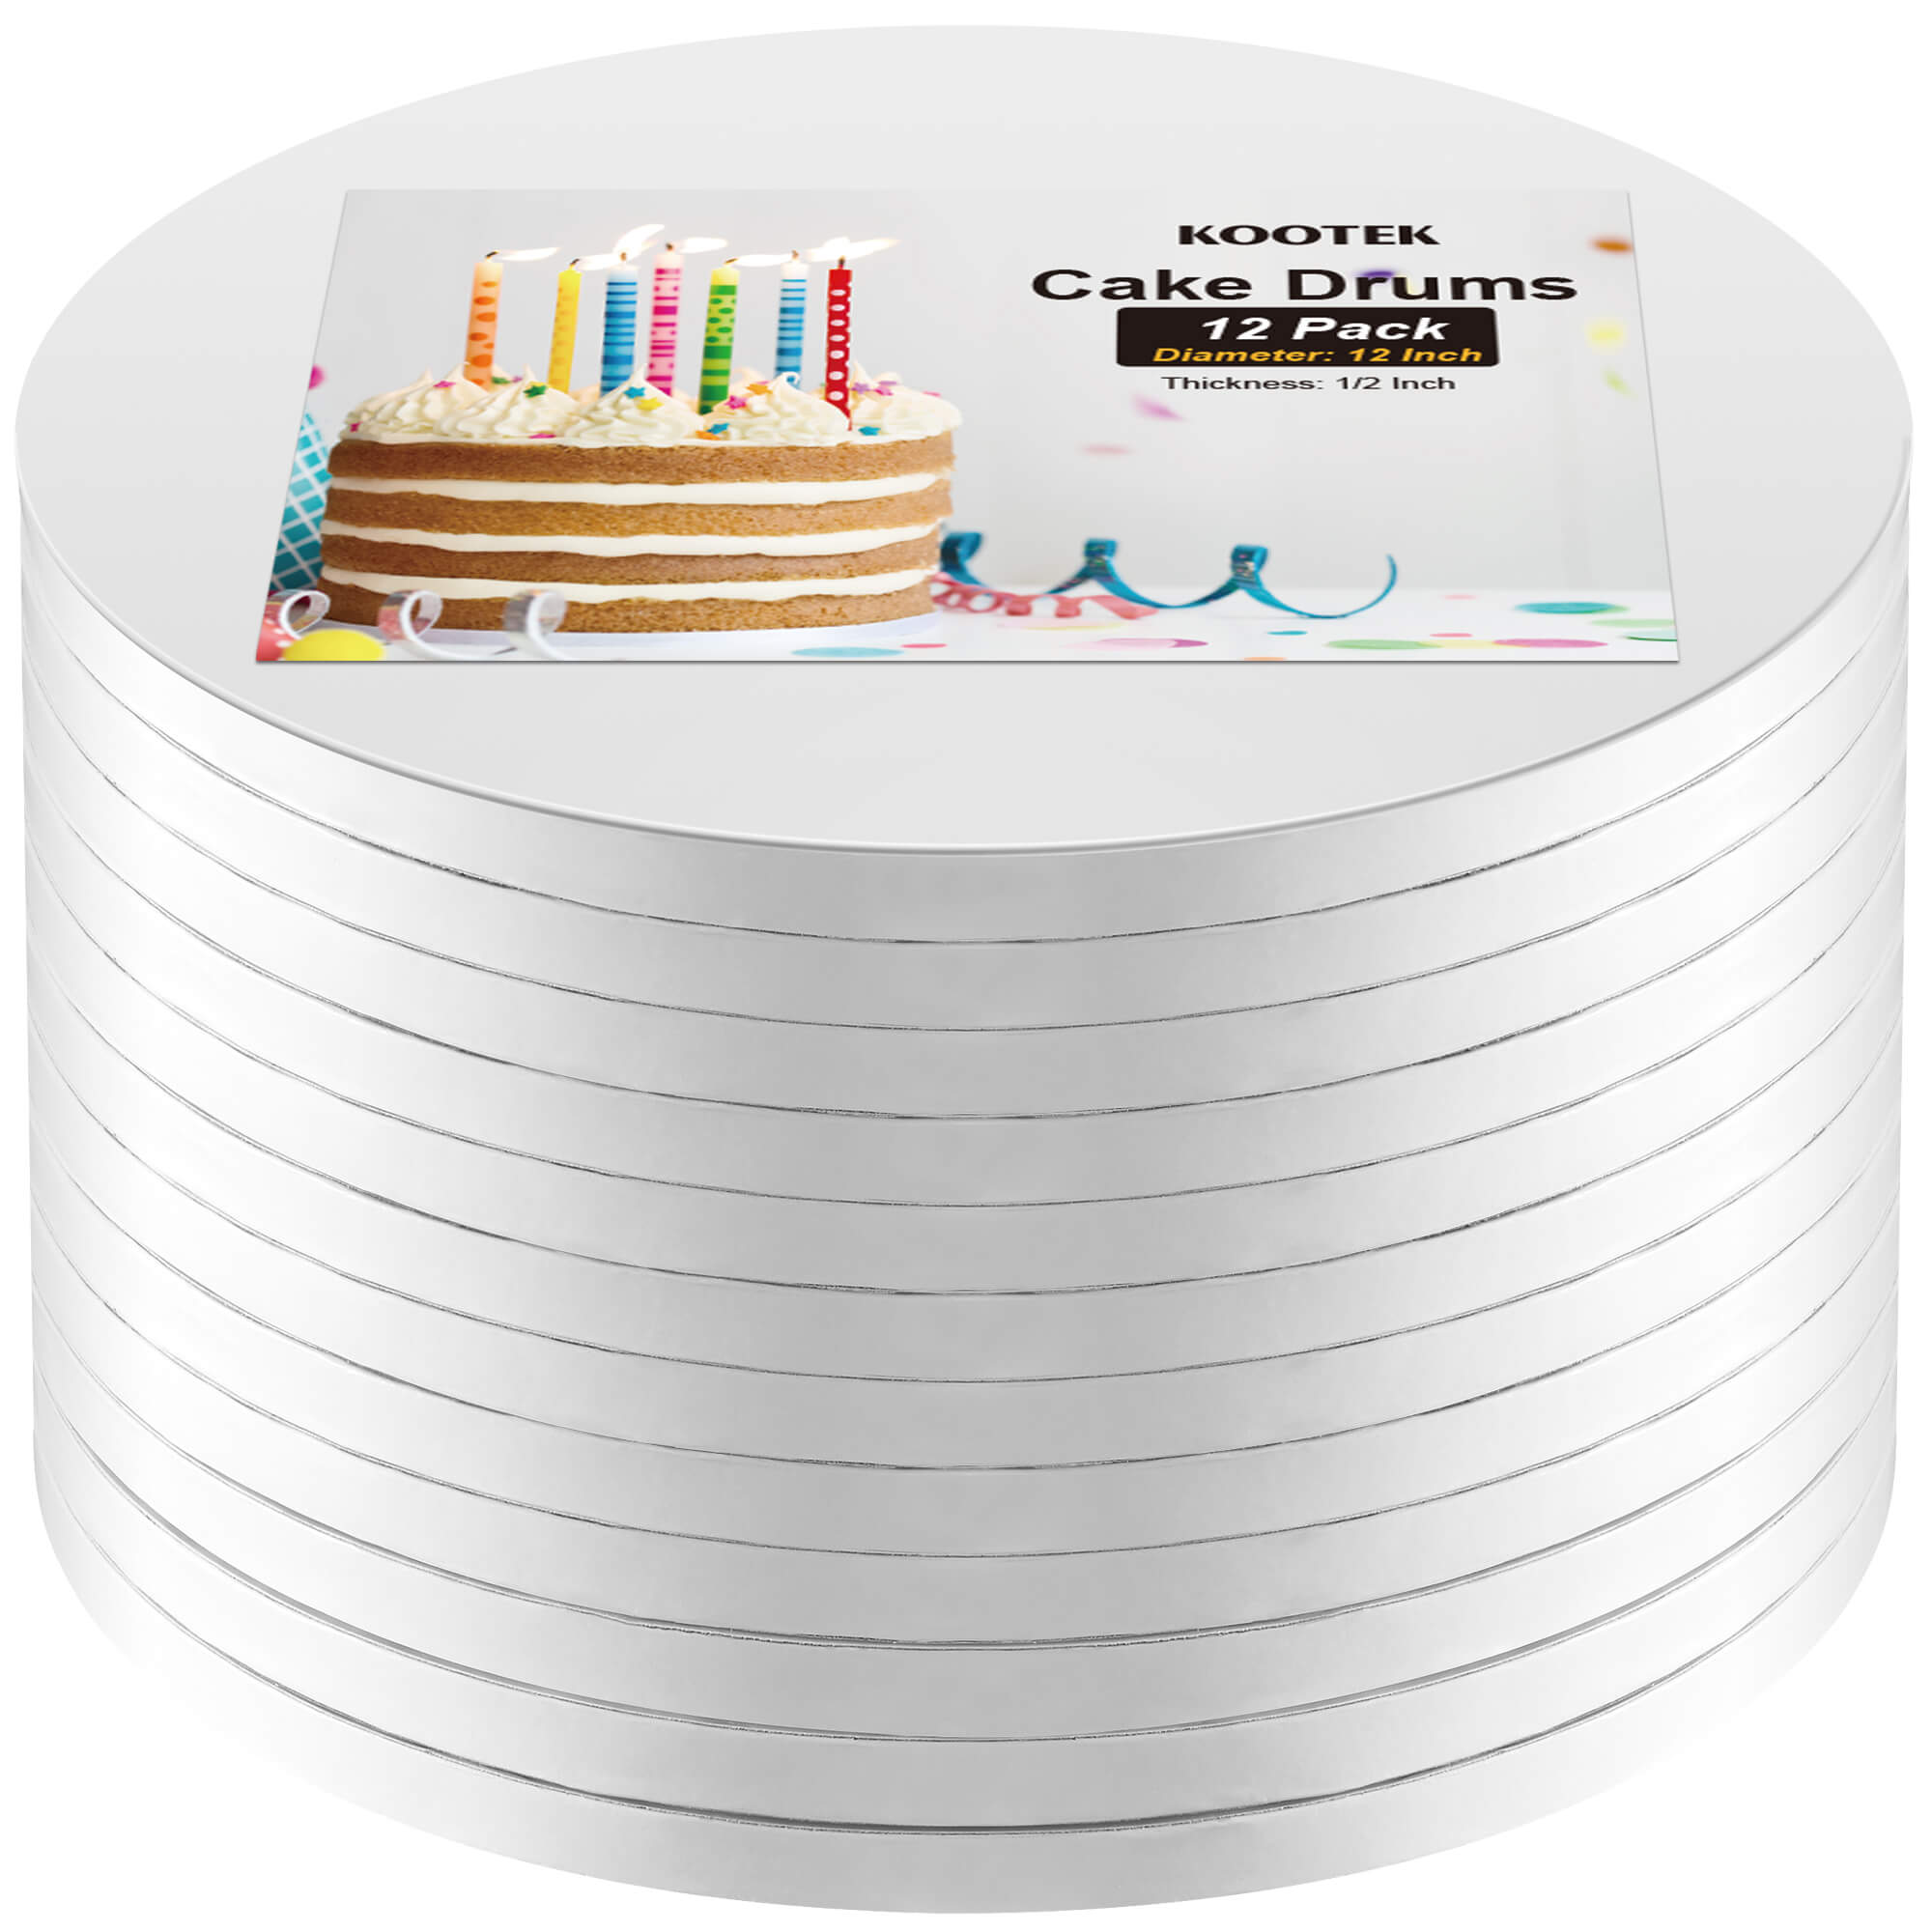 Kootek Cake Boards Drum 12 Inch Round, 1/2" Thick Cake Drums, Cake Decorating Supplies White 12-Pack Sturdy Cake Corrugated Cardboard for Multi-Layer Cakes